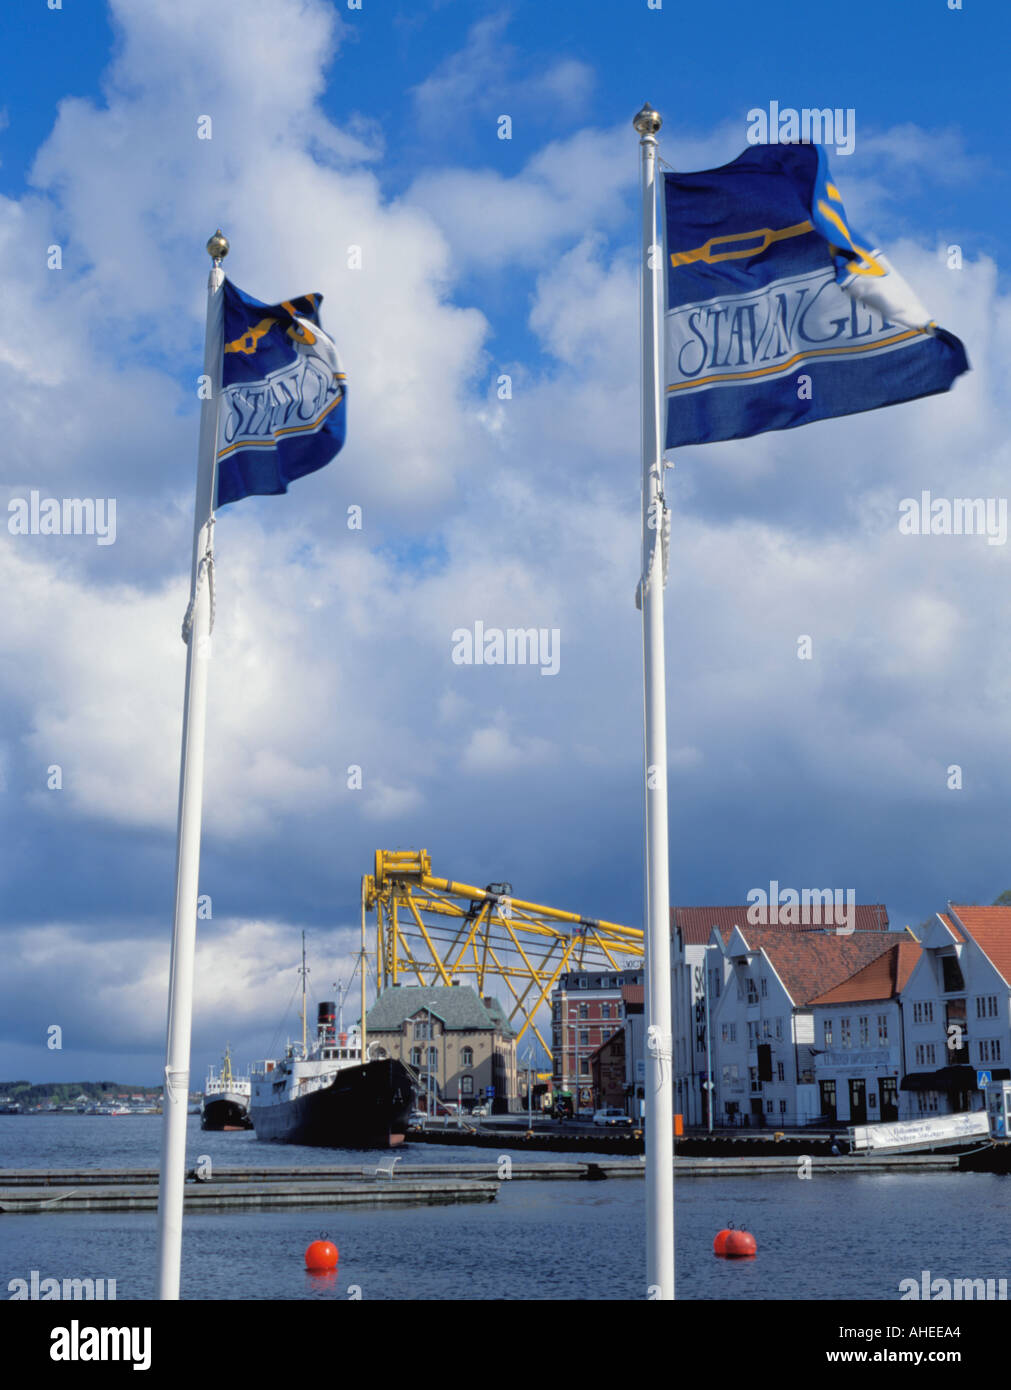 Flags and view over Vågen (Harbour), Stavanger, Rogaland, Norway. Stock Photo